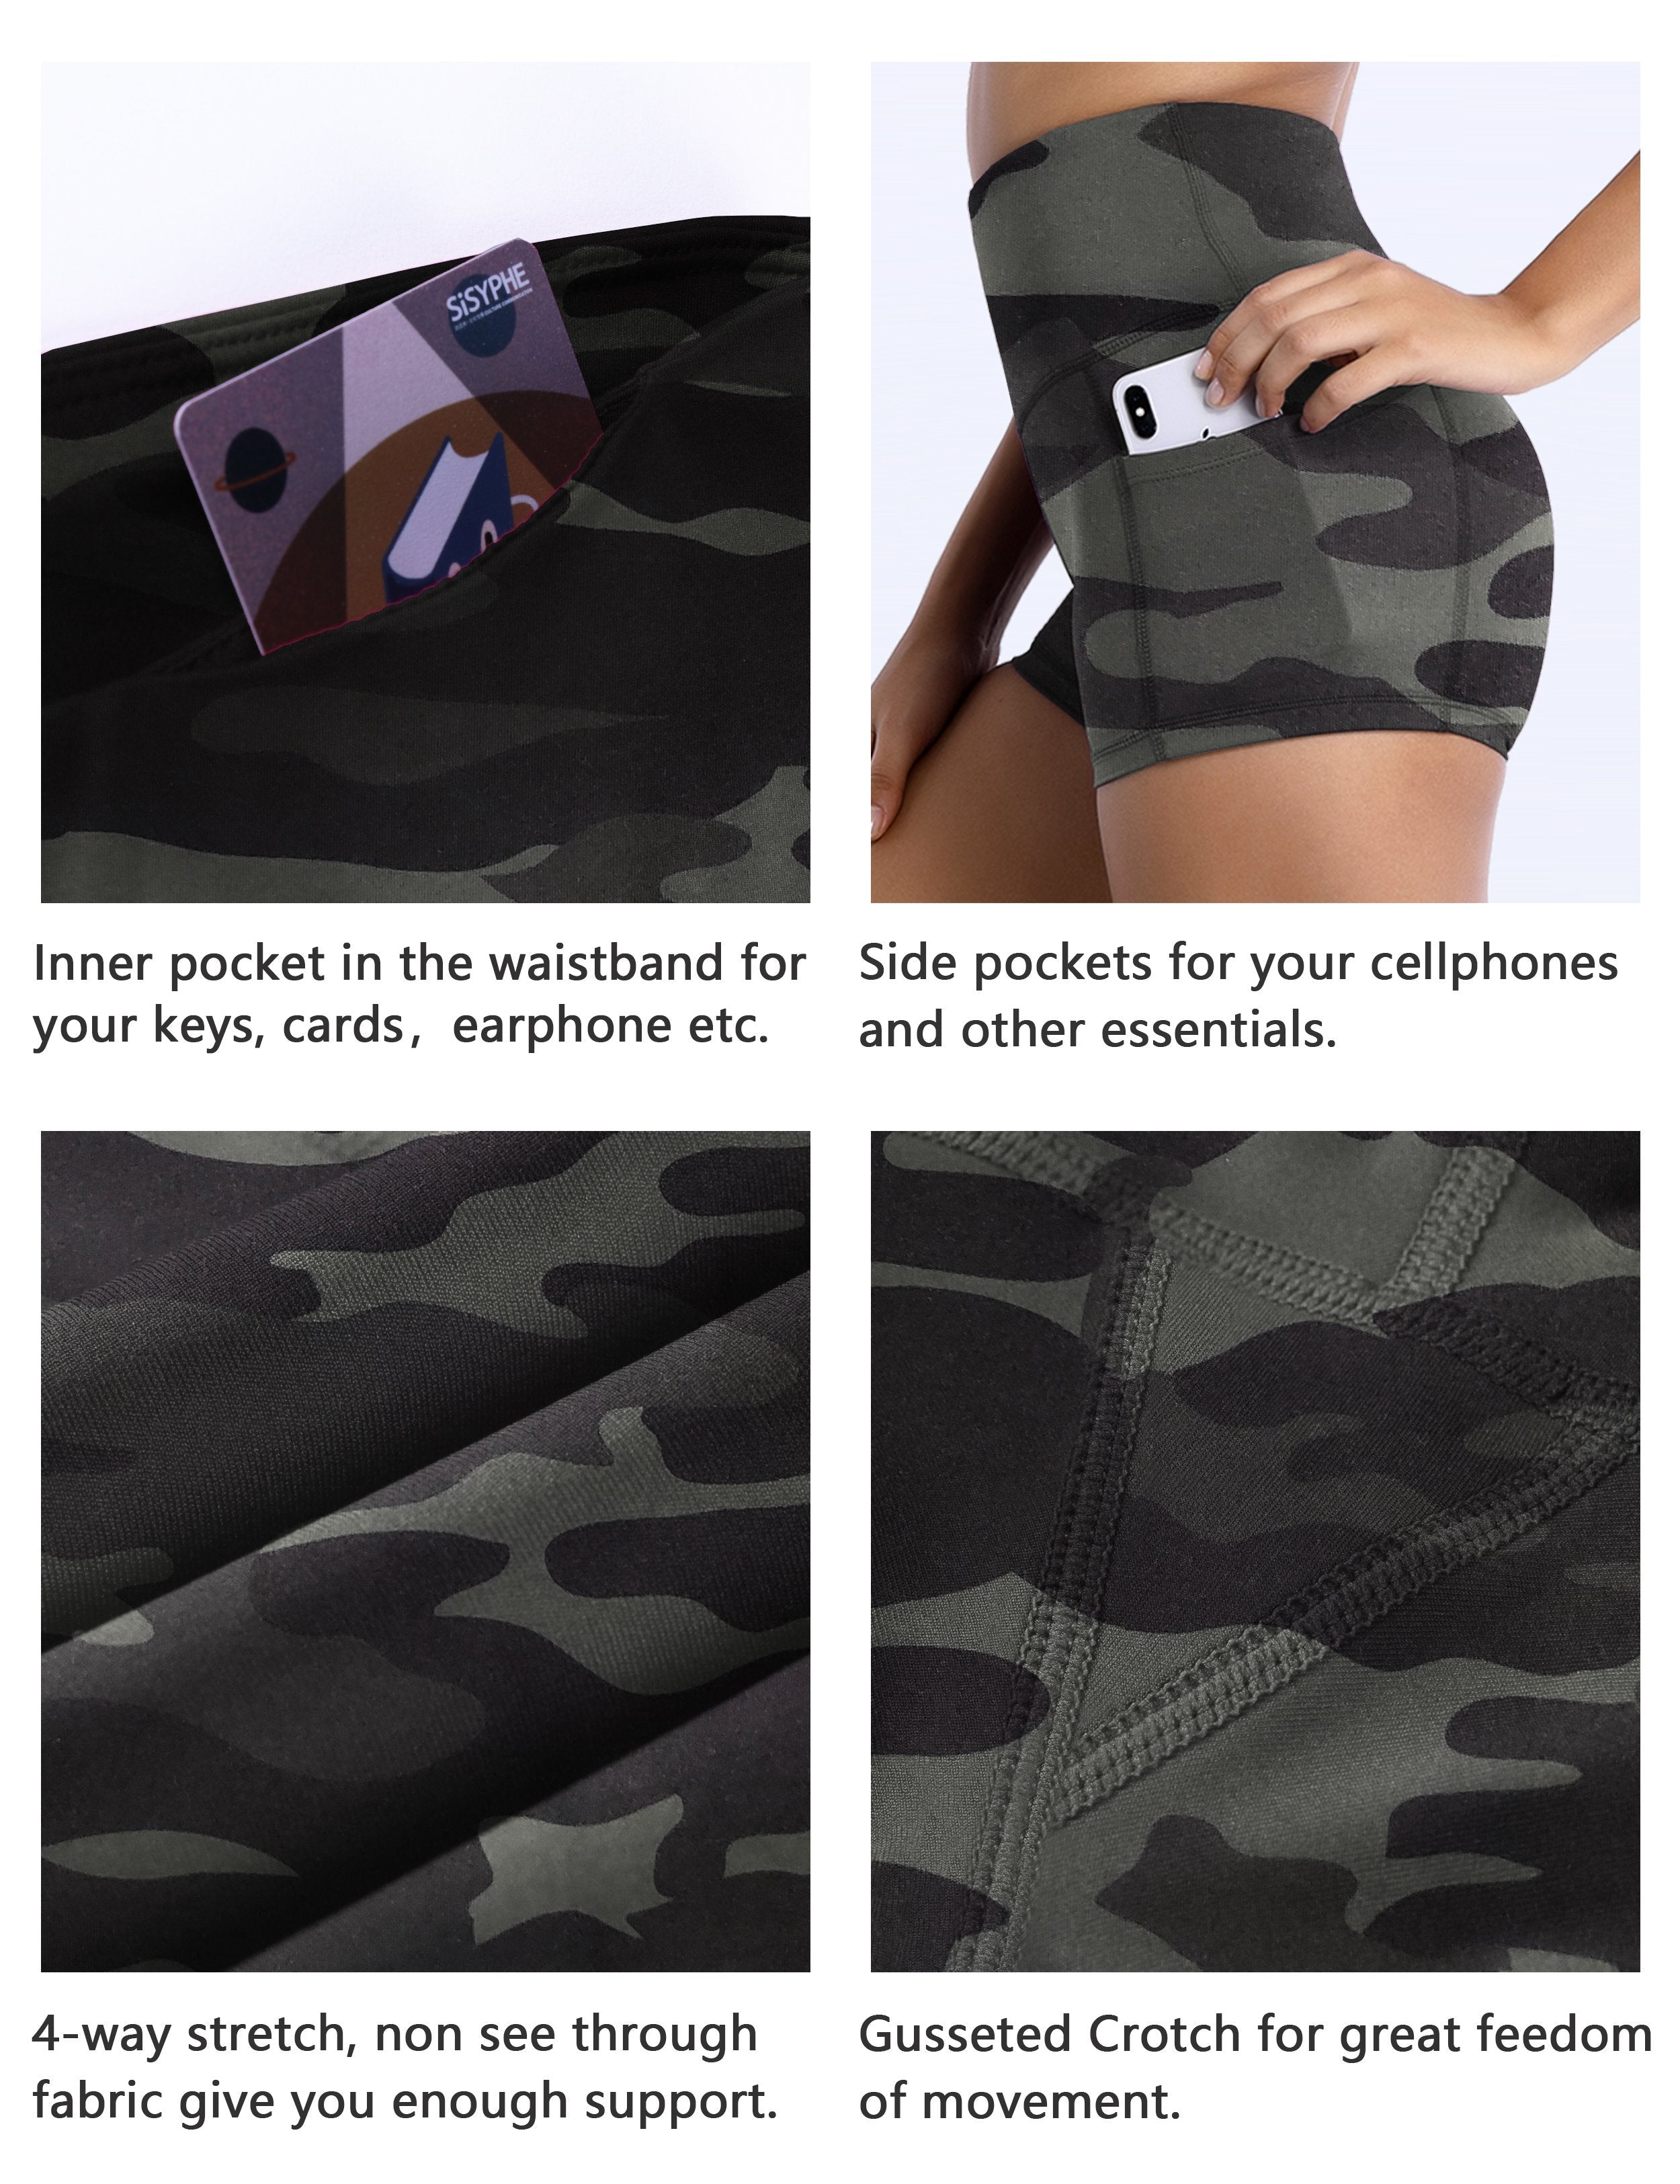 2.5" Printed Side Pockets Running Shorts dimgraycamo Sleek, soft, smooth and totally comfortable: our newest sexy style is here. Softest-ever fabric High elasticity High density 4-way stretch Fabric doesn't attract lint easily No see-through Moisture-wicking Machine wash 78% Polyester, 22% Spandex